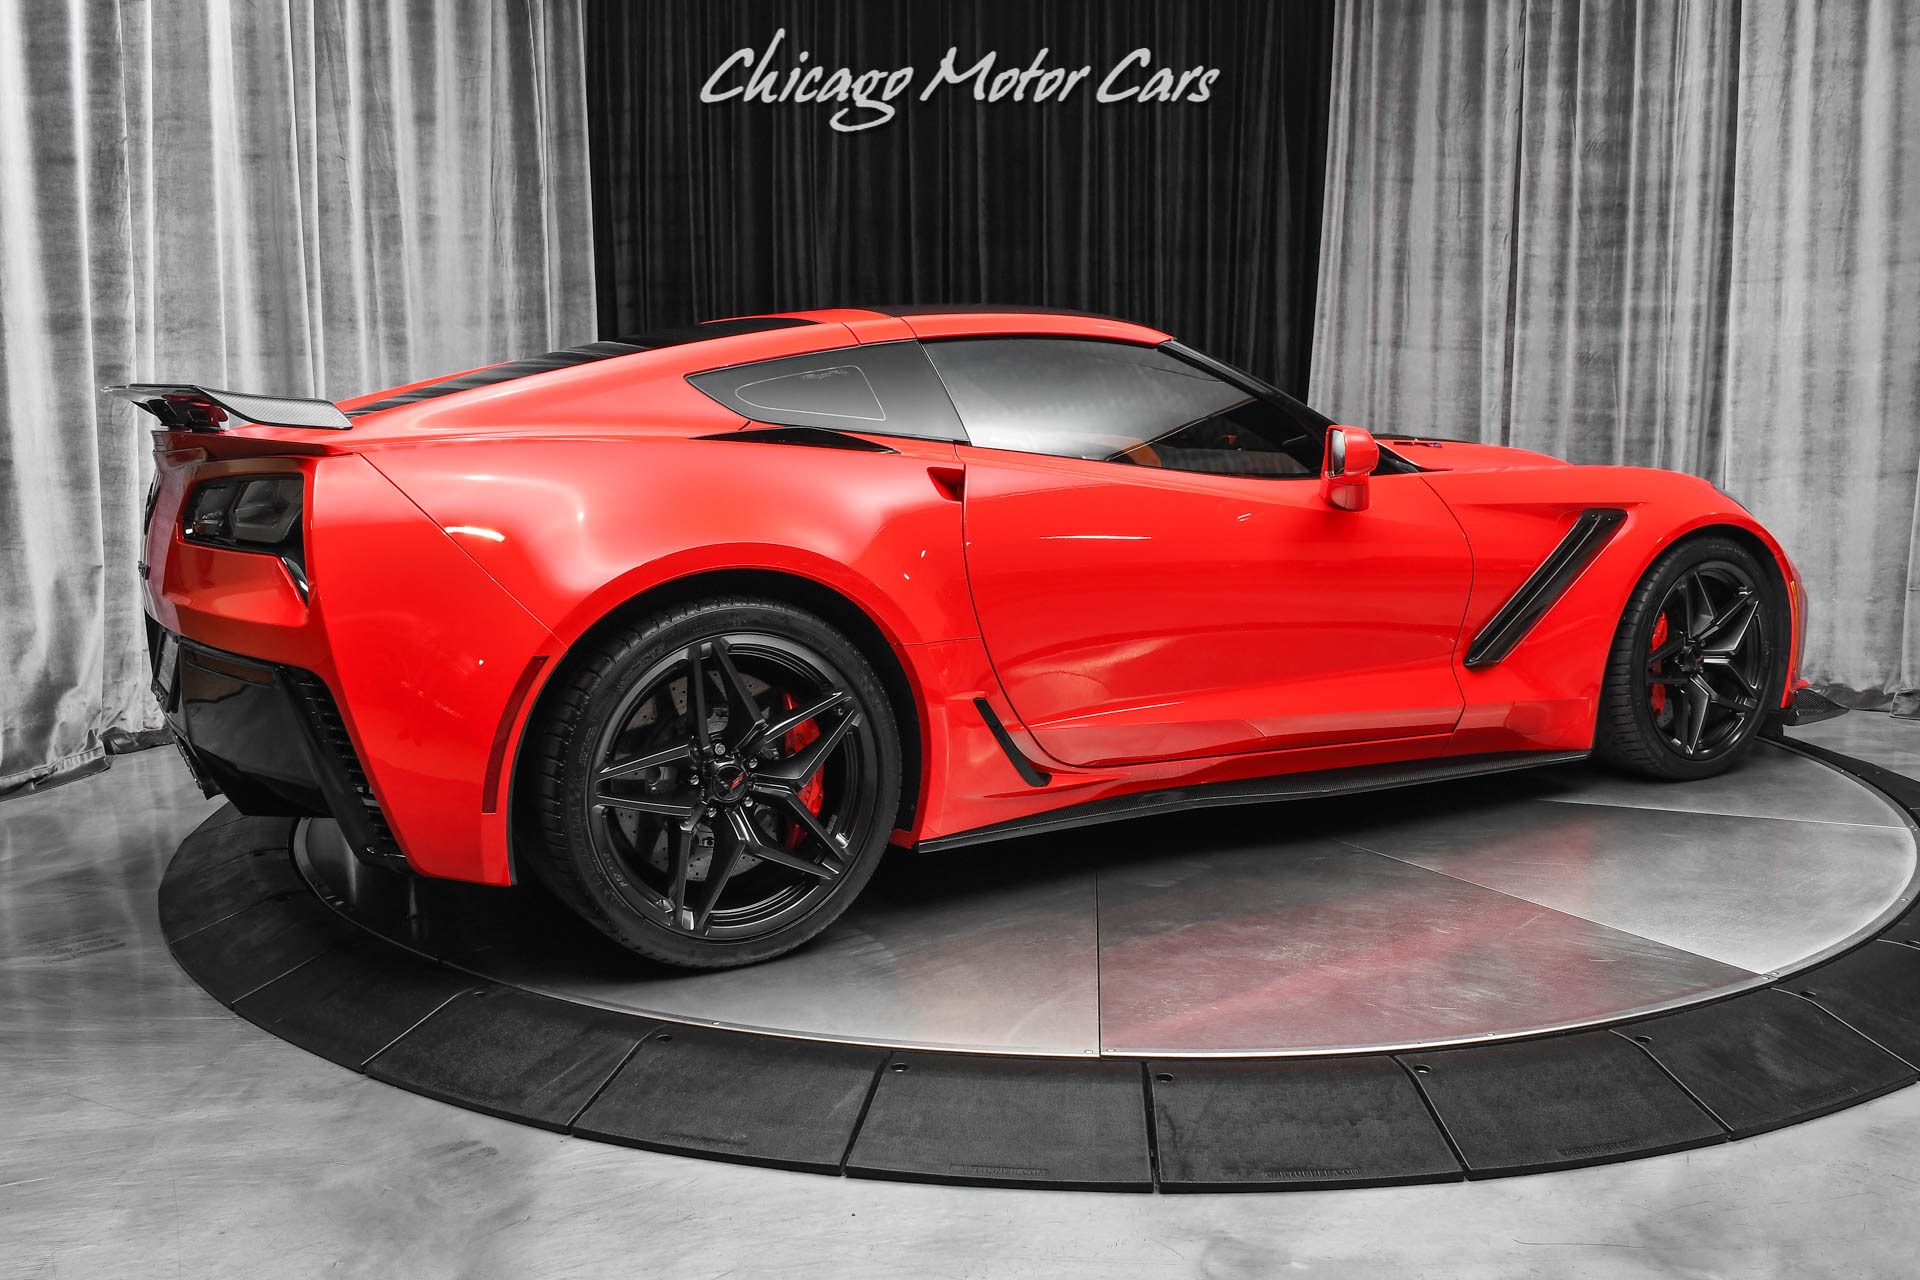 Used-2019-Chevrolet-Corvette-ZR1-3ZR-Coupe-7-Speed-Manual-Hot-Color-Combo